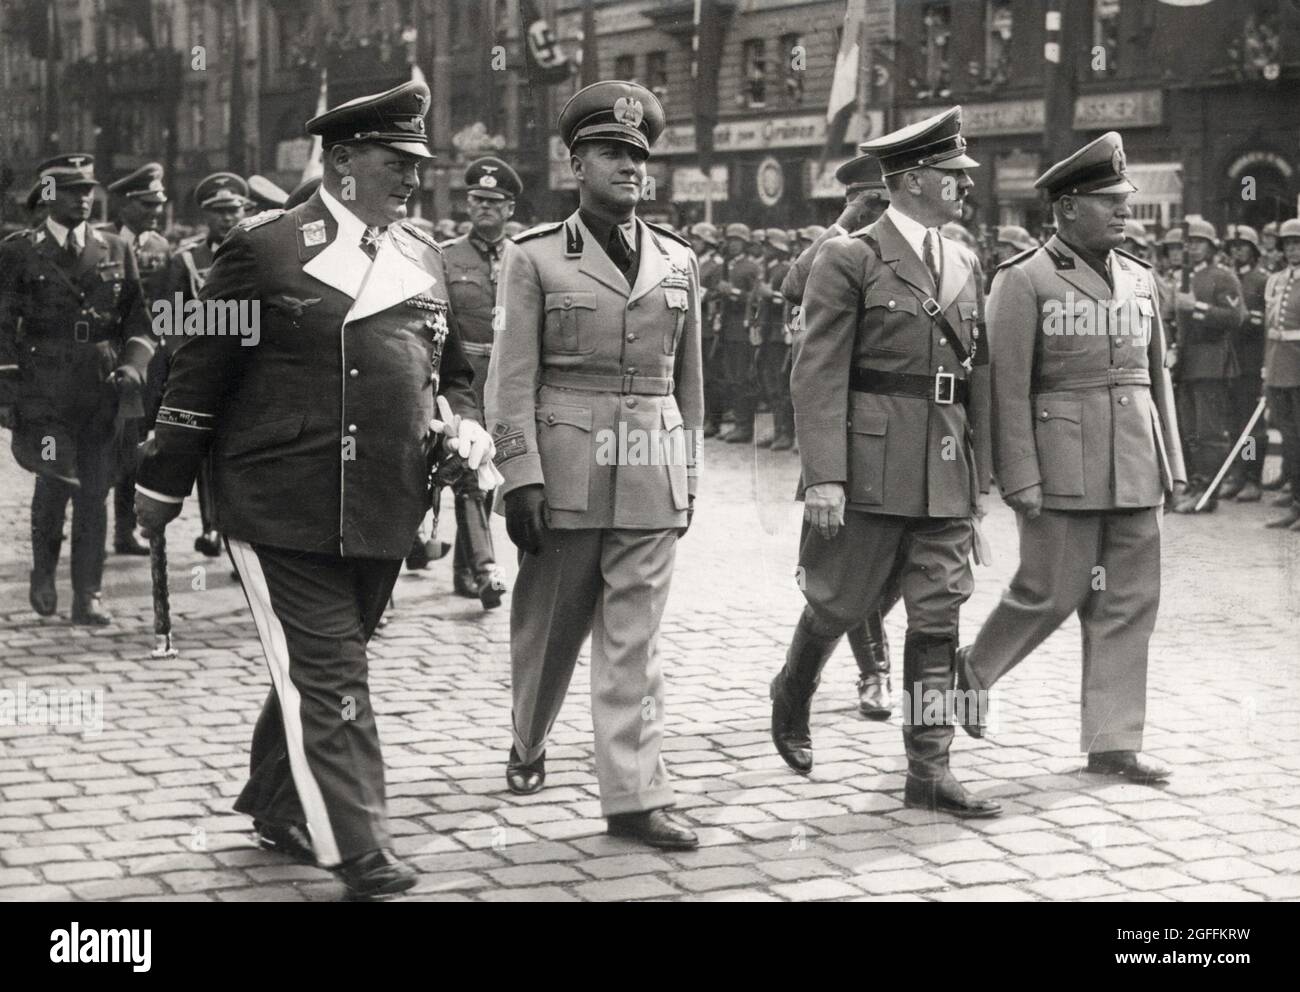 Hermann Göring, Count Ciano, Adolf Hitler and Benito Mussolini walking together Stock Photo